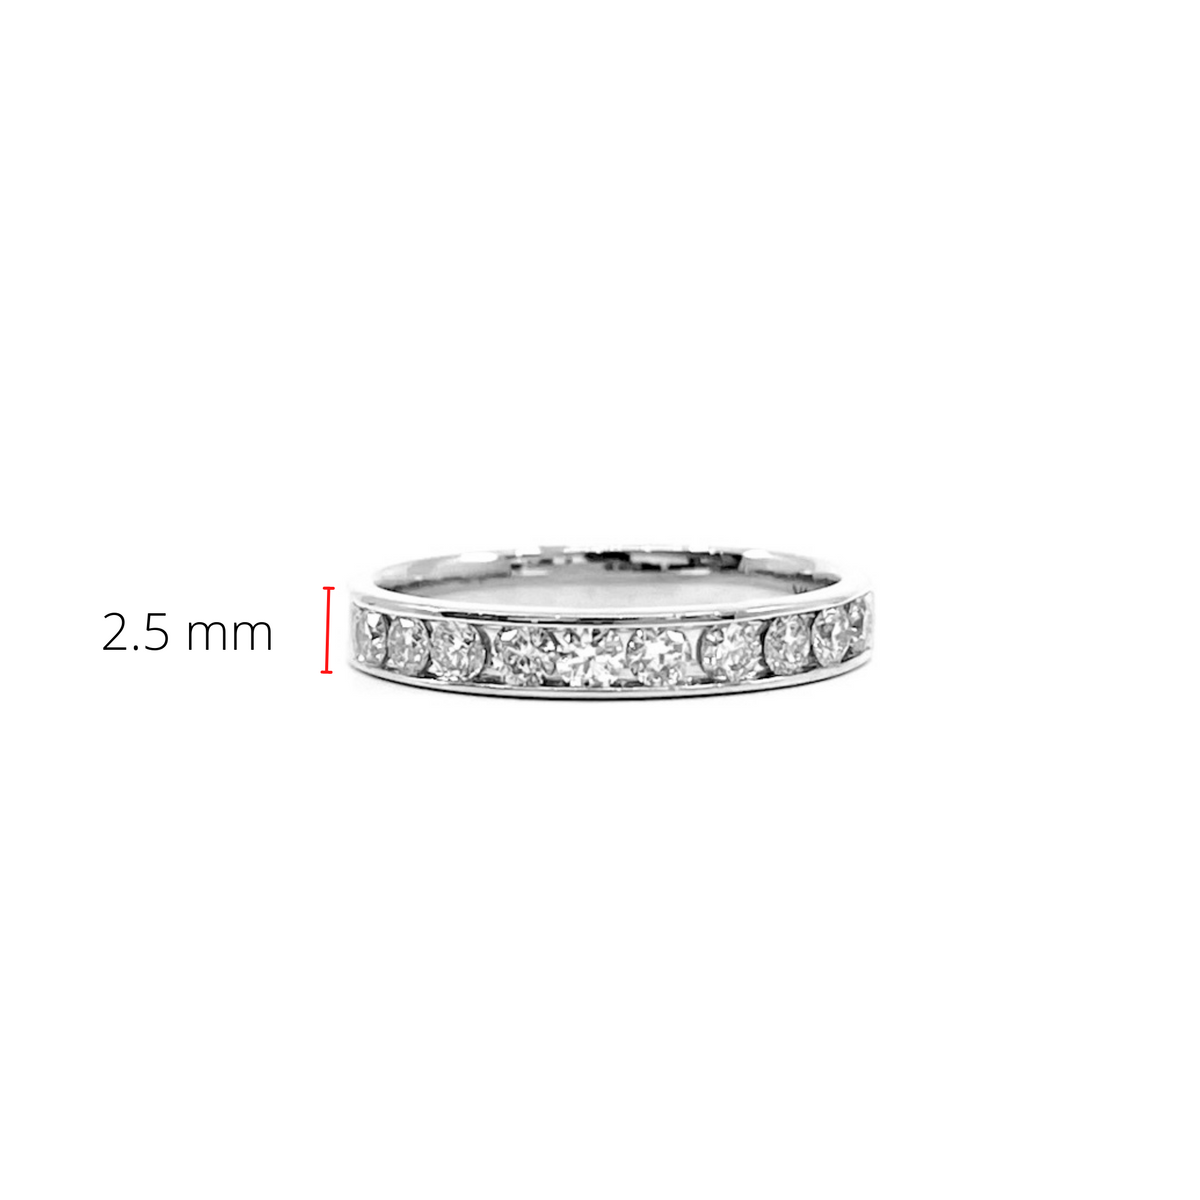 14K White Gold 0.33cttw Diamond Anniversary Channel Set Ring / Band, size 6.5